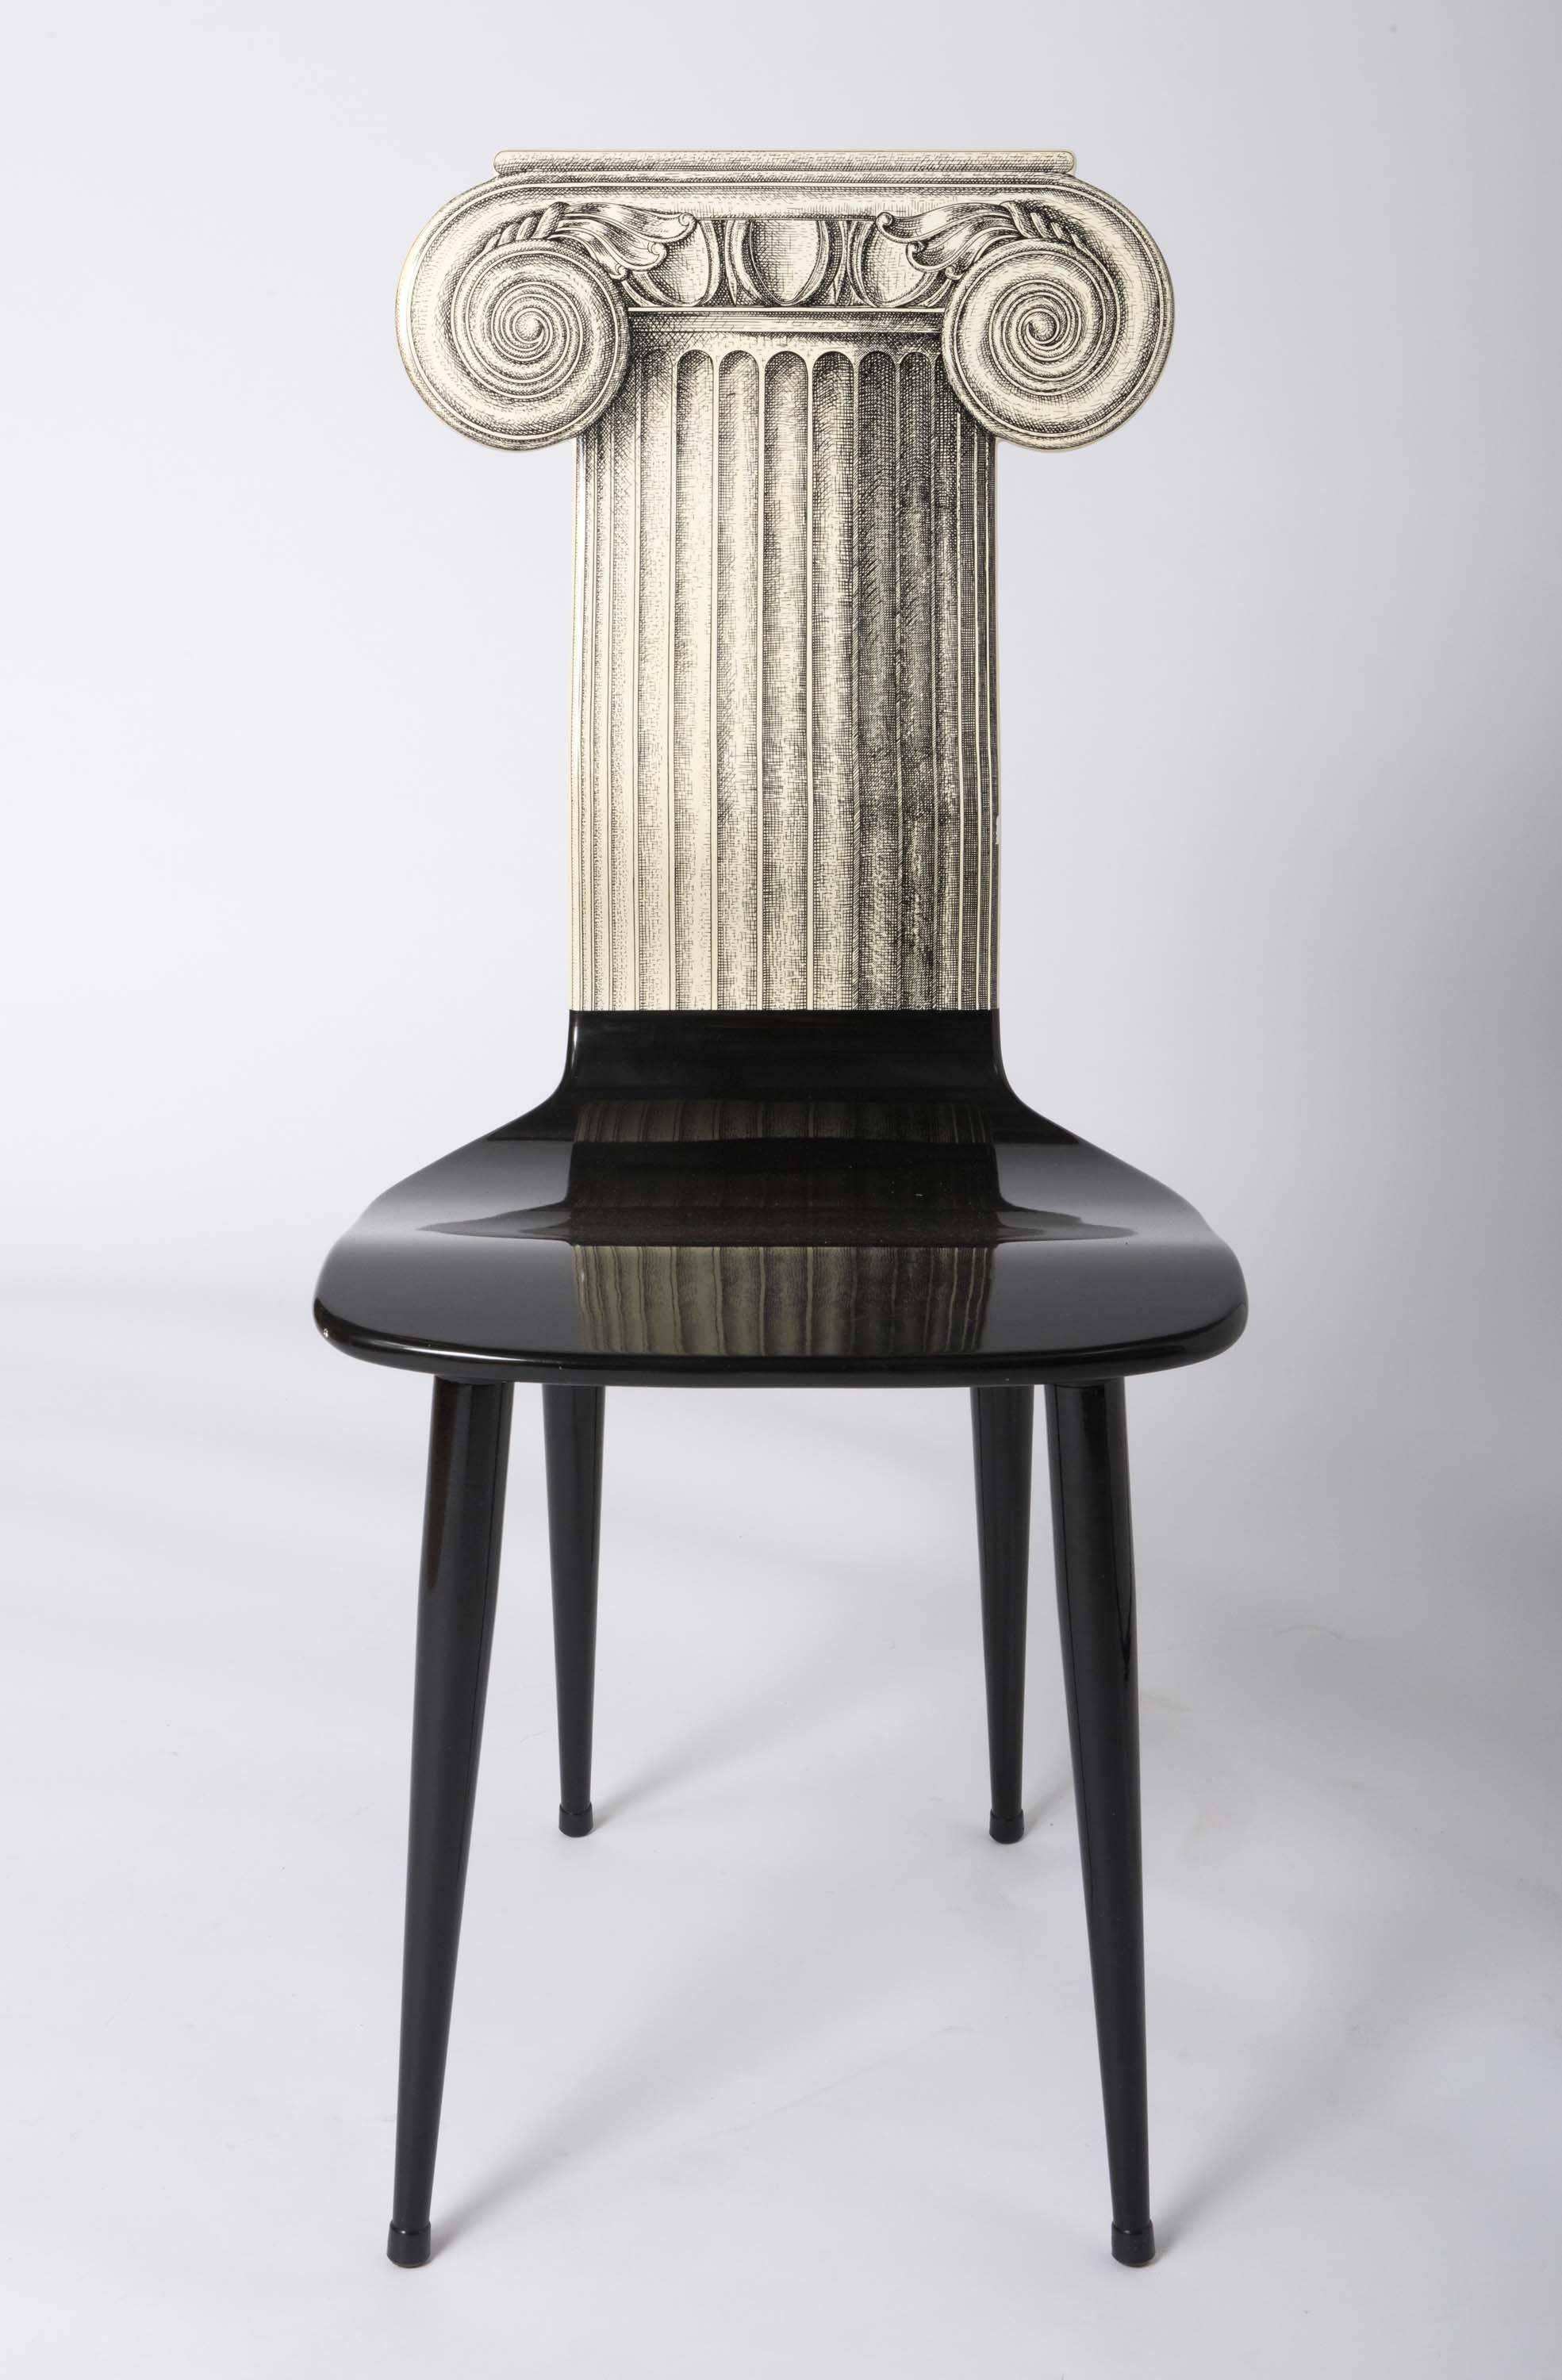 A Piero Fornasetti chair
“Capitello Ionico”
Lithographically printed and hand colored.
Mark to base.
Italy, circa 1970.
Measures: 94 cm high x 41 cm wide x 45 cm deep.
 